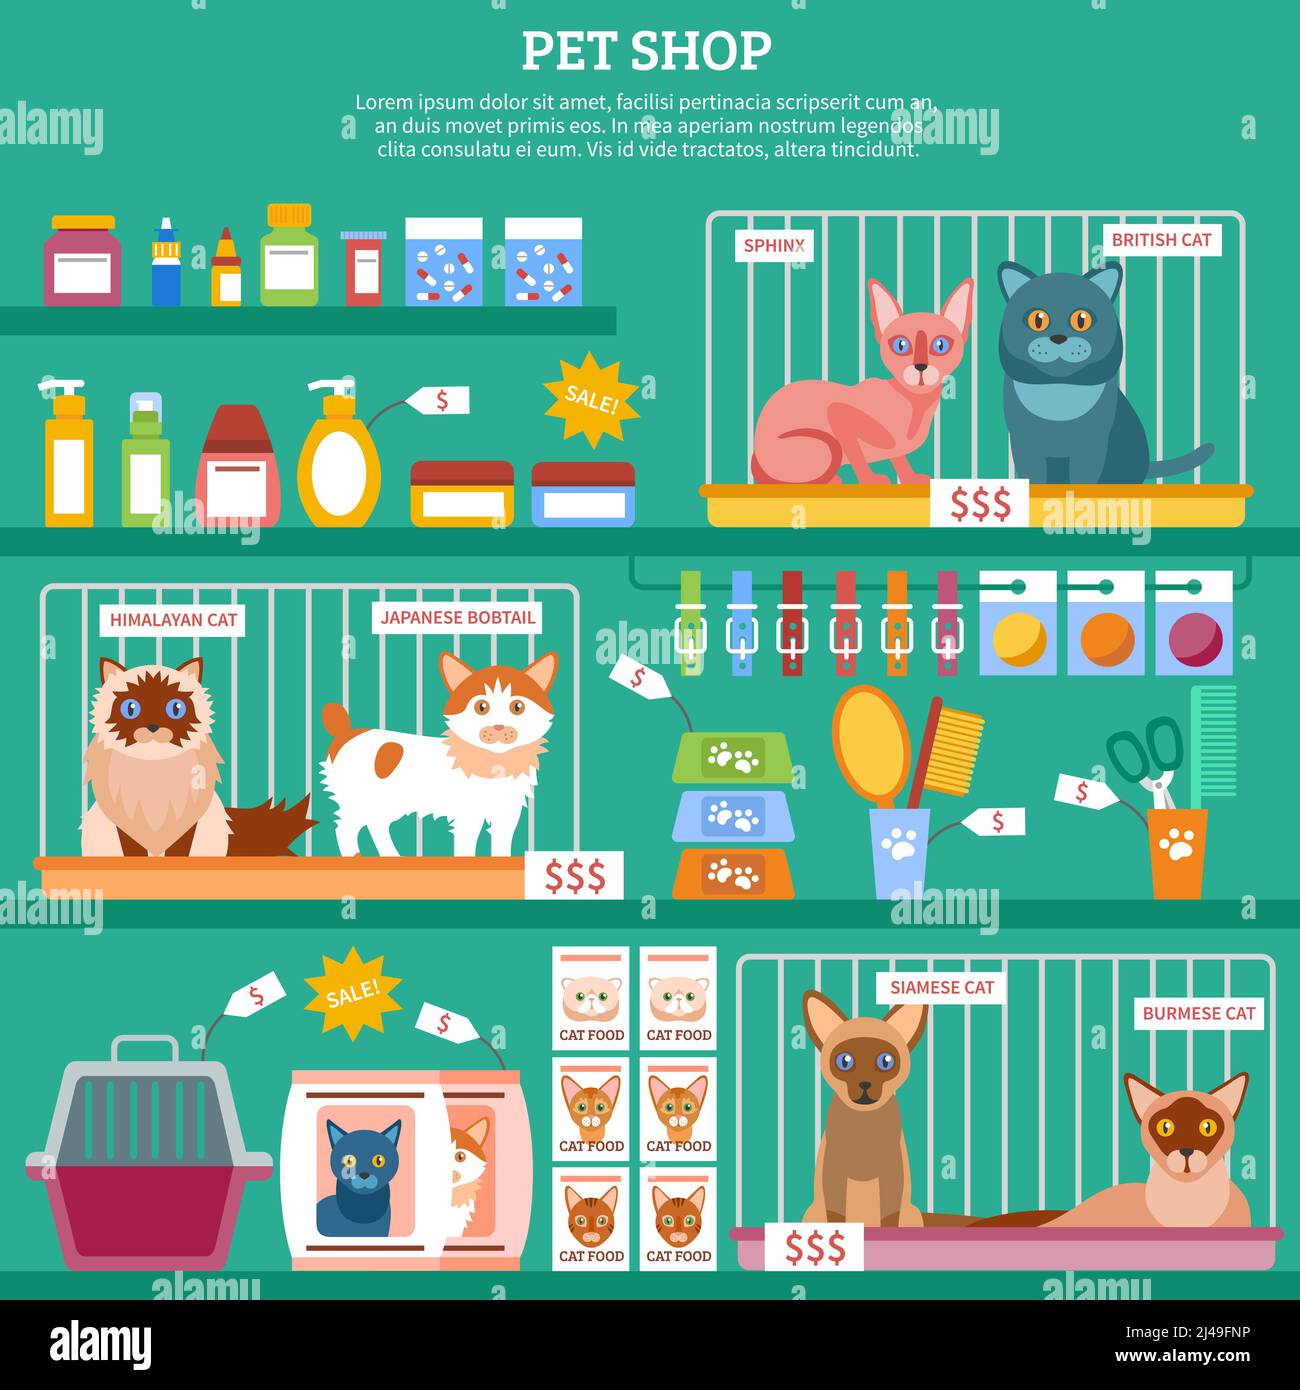 Pet shop concept with flat cat breed icons vector illustration Stock Vector